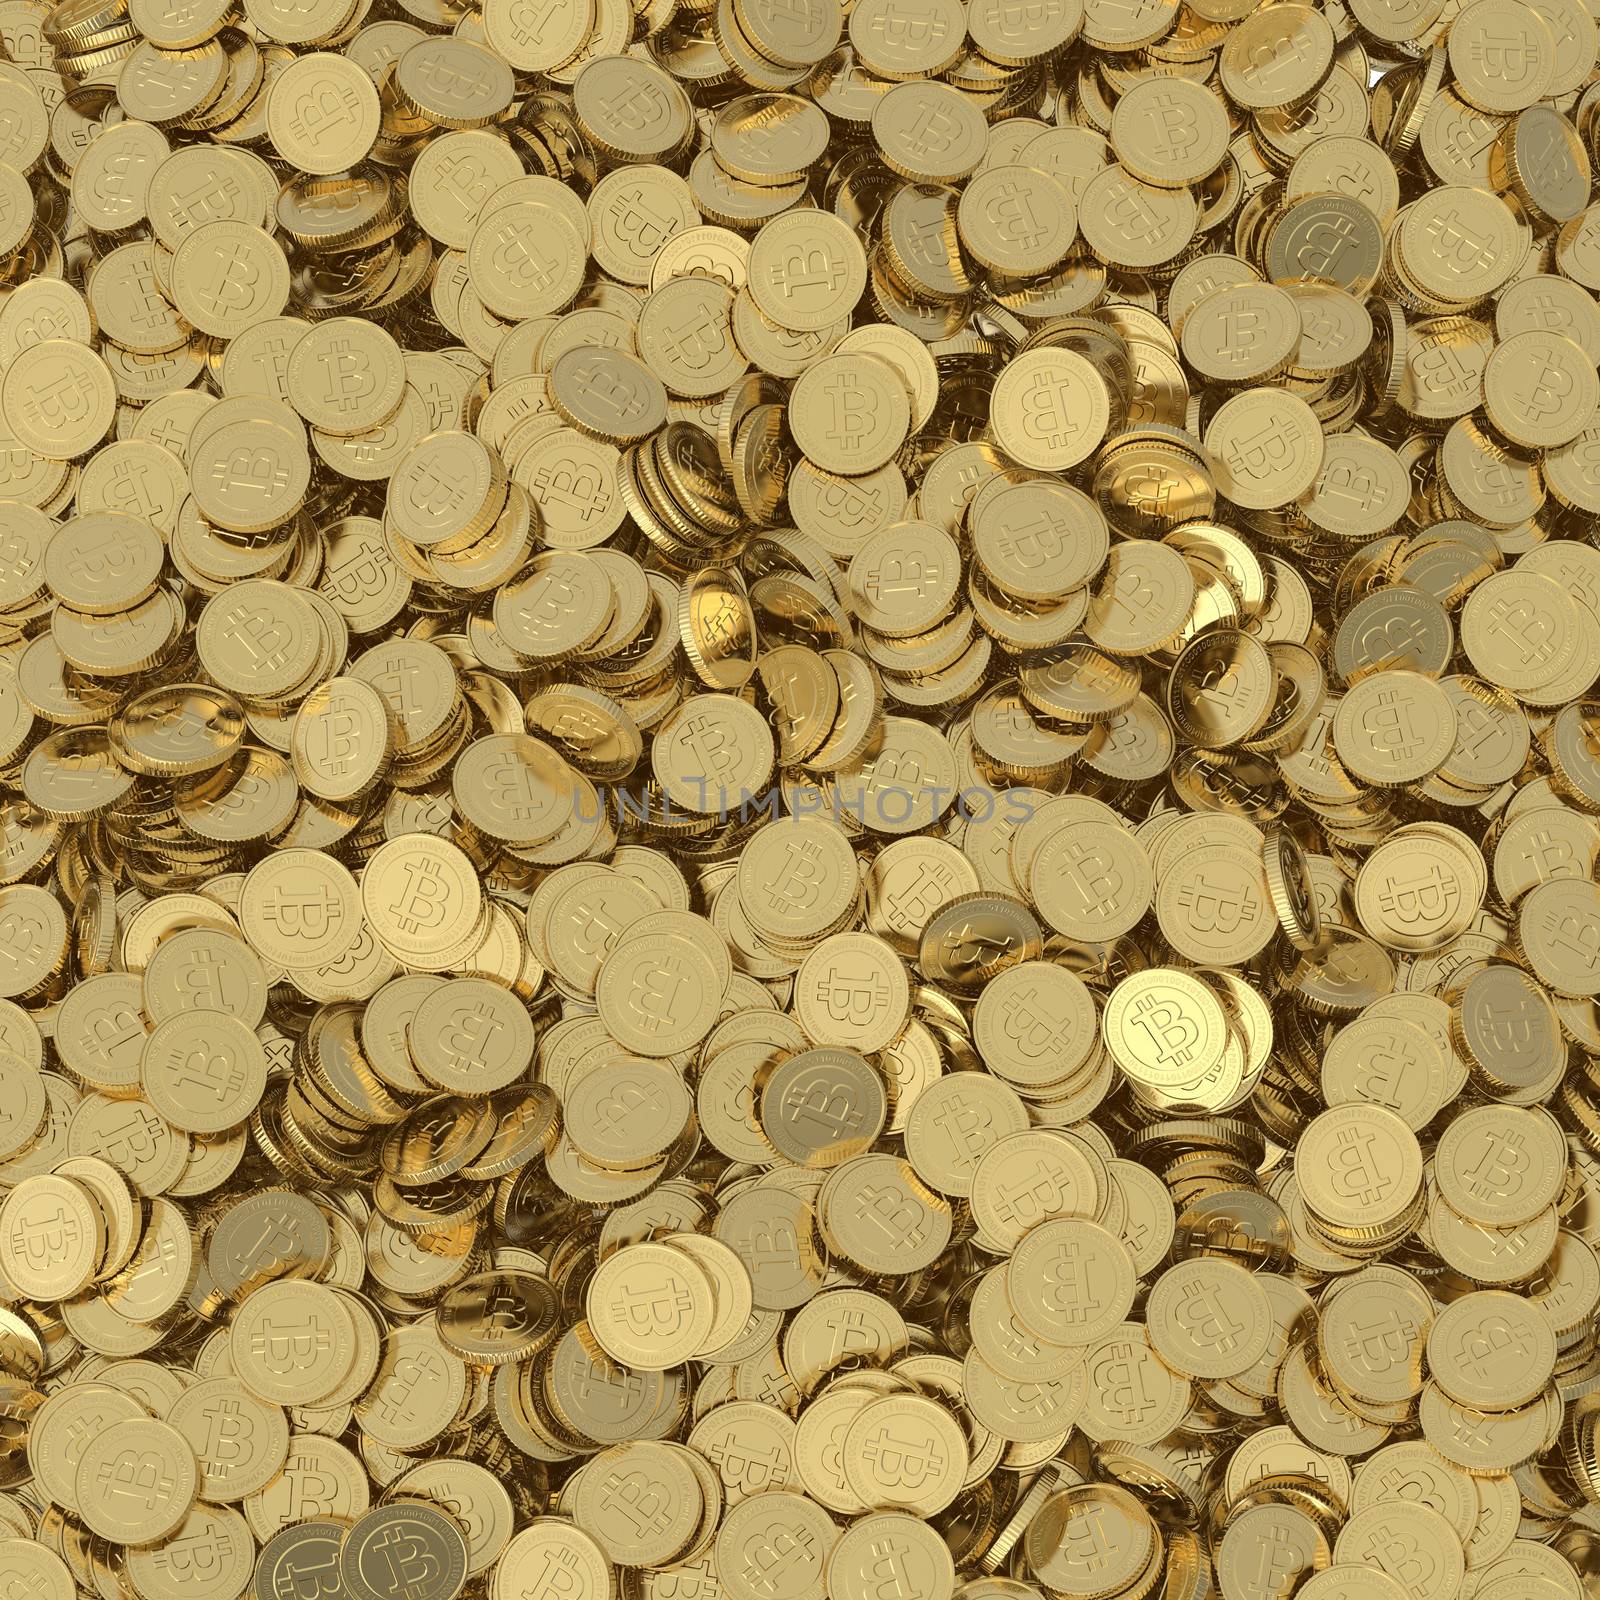 Golden Bitcoin digital currency background by 123dartist